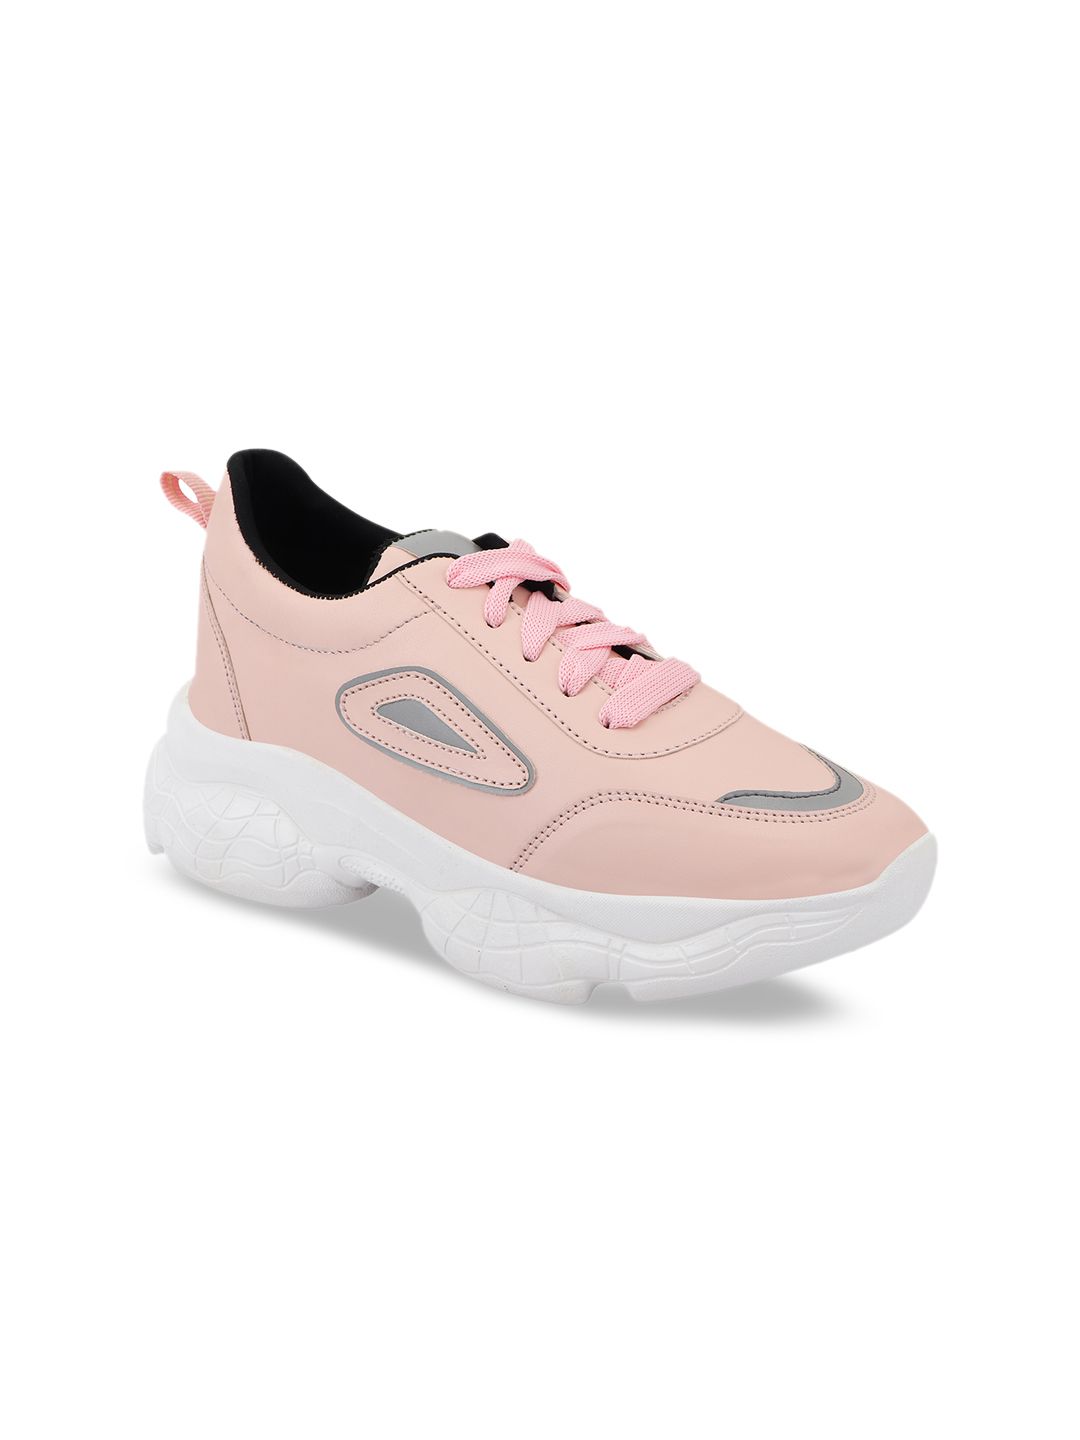 Shoetopia Women Pink Synthetic Walking Shoes Price in India